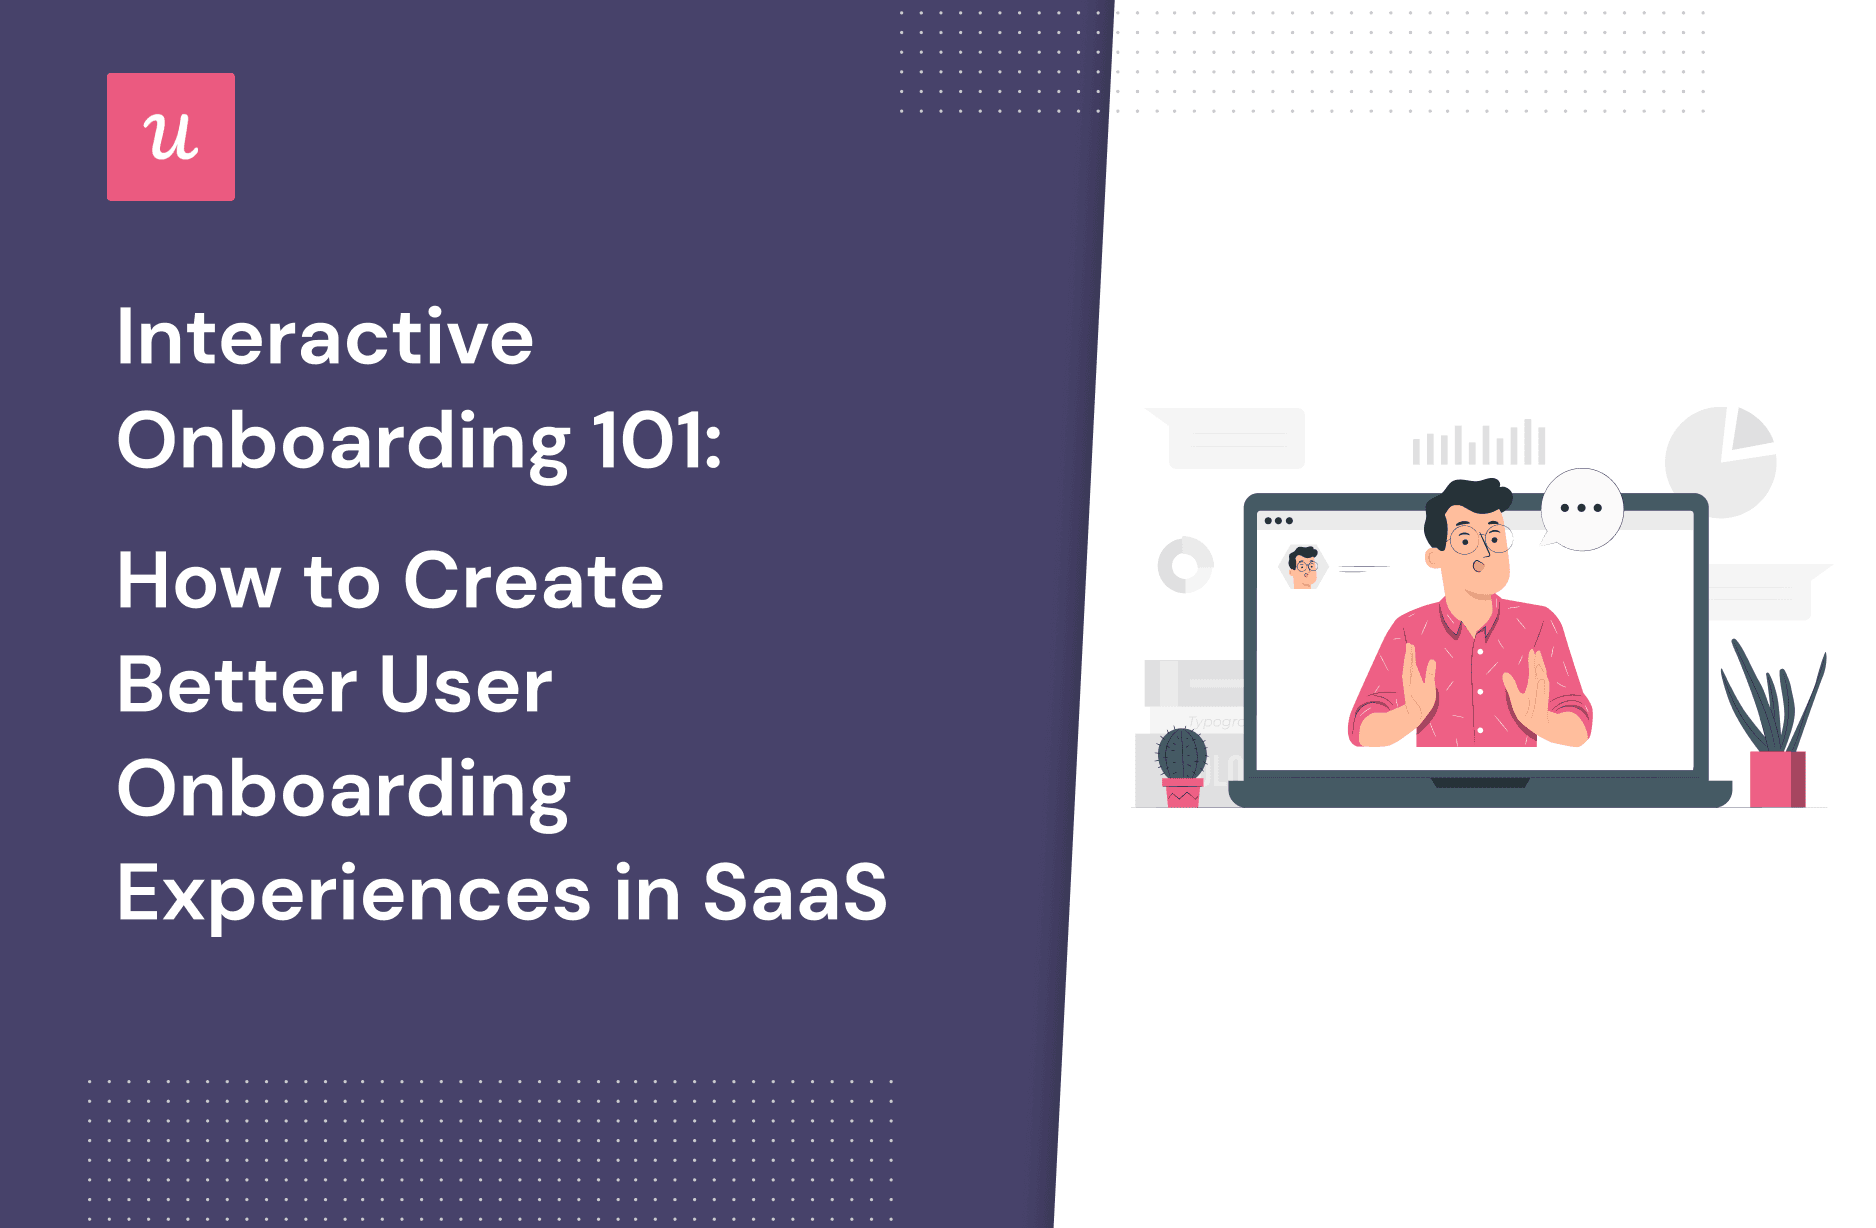 Interactive Onboarding 101: How to Create Better User Onboarding Experiences in SaaS cover